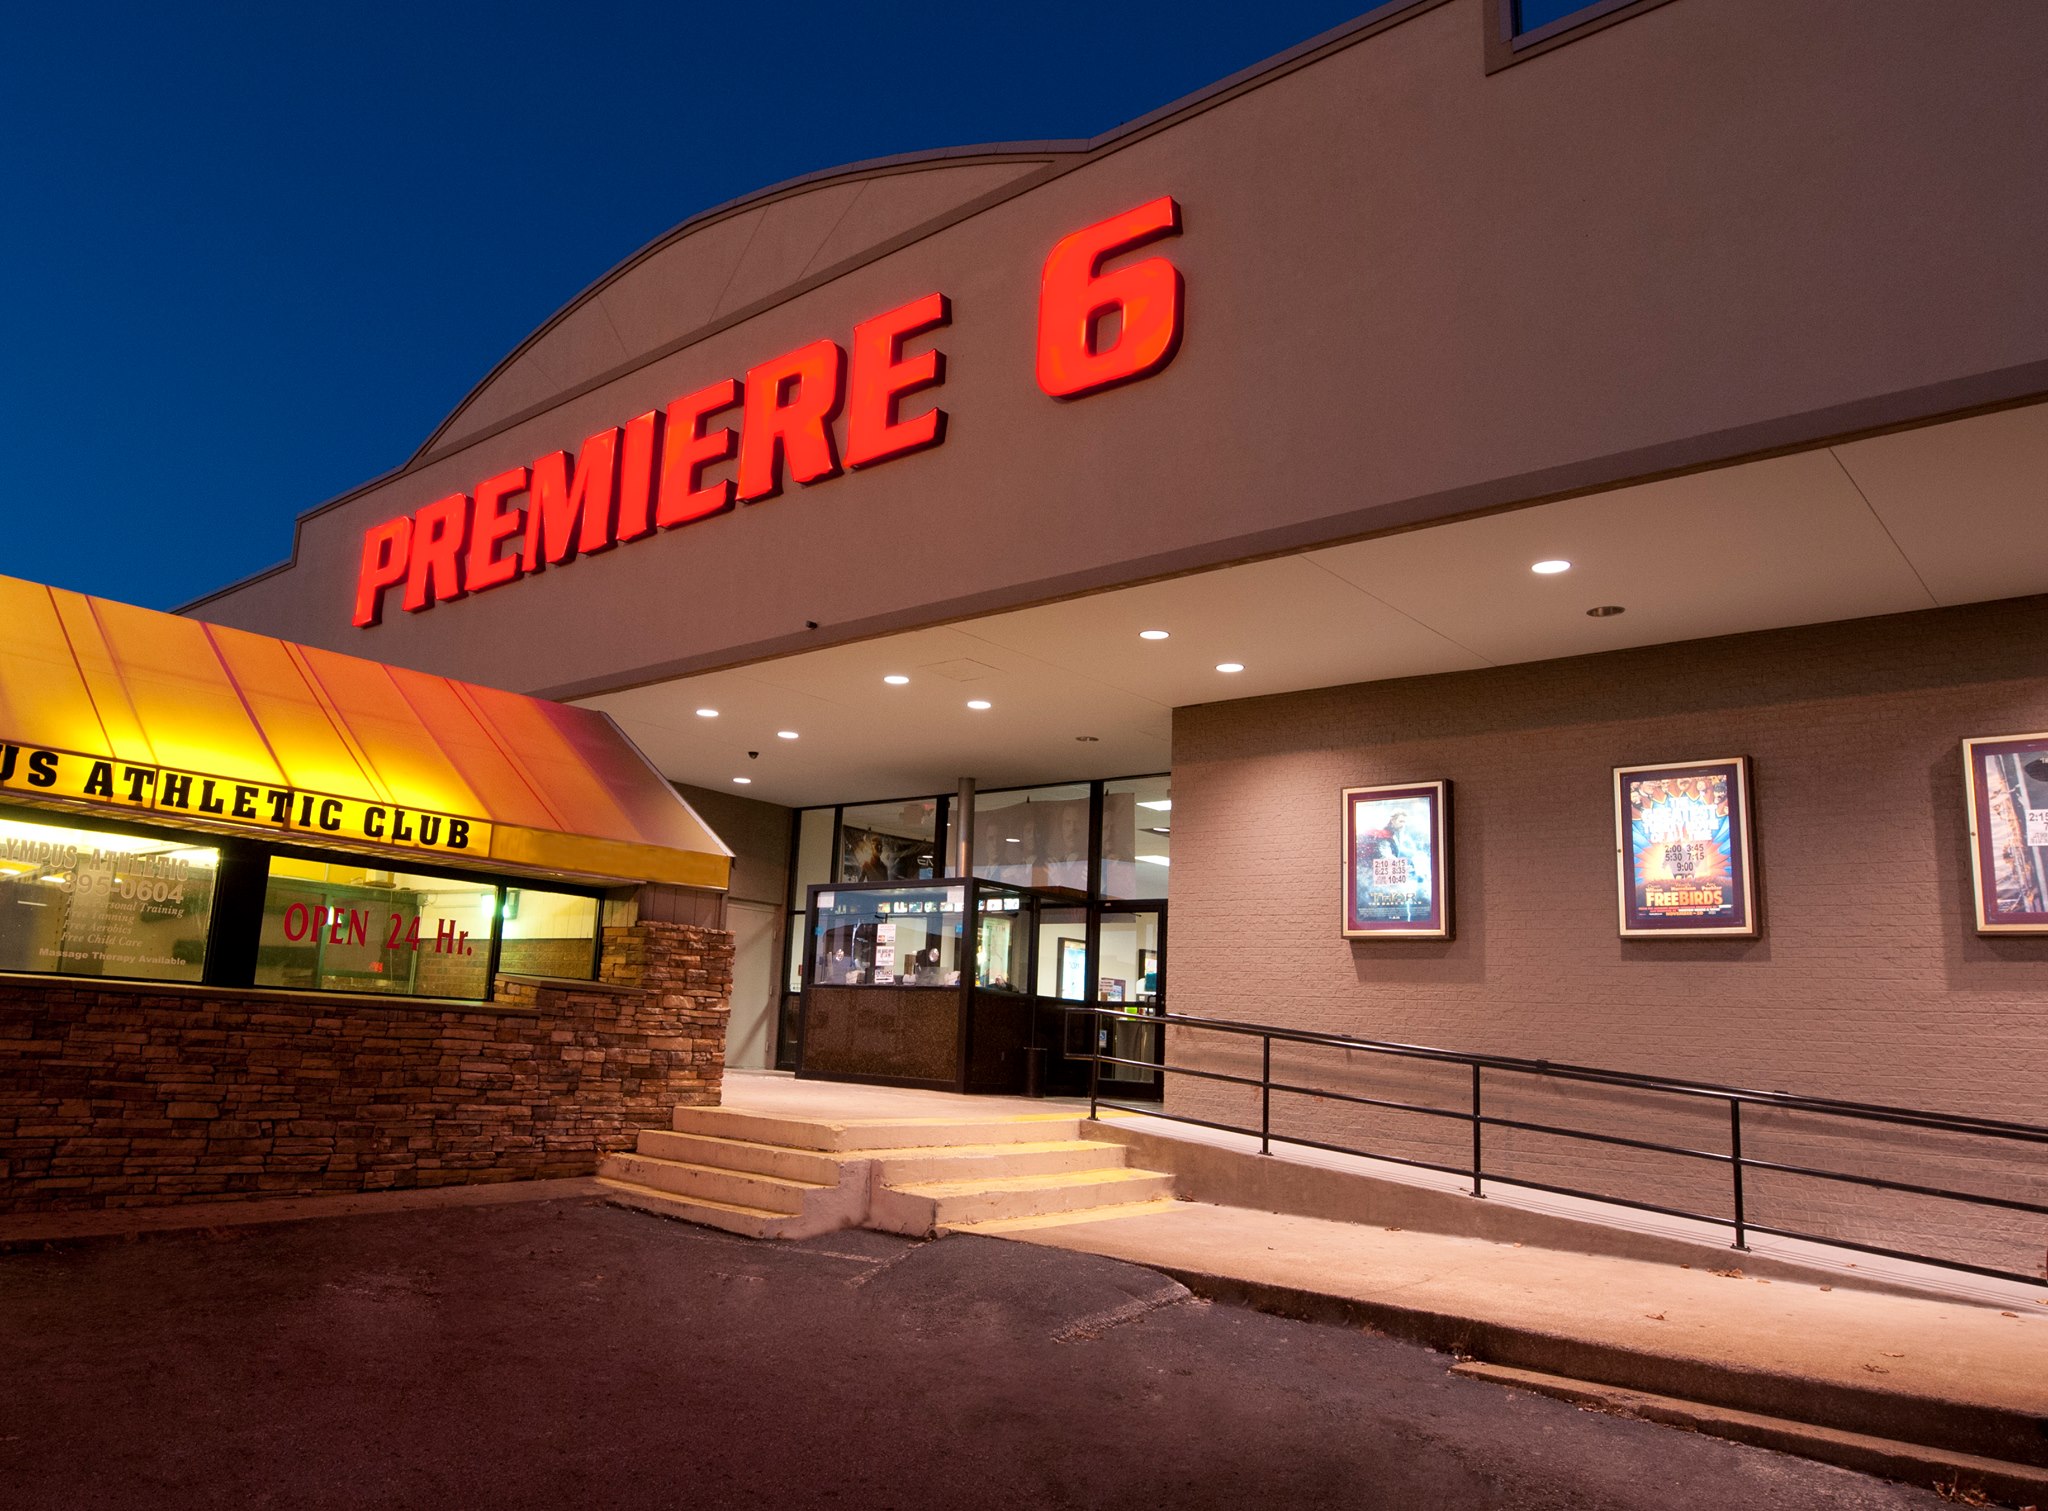 Premiere 6 movie theater at night